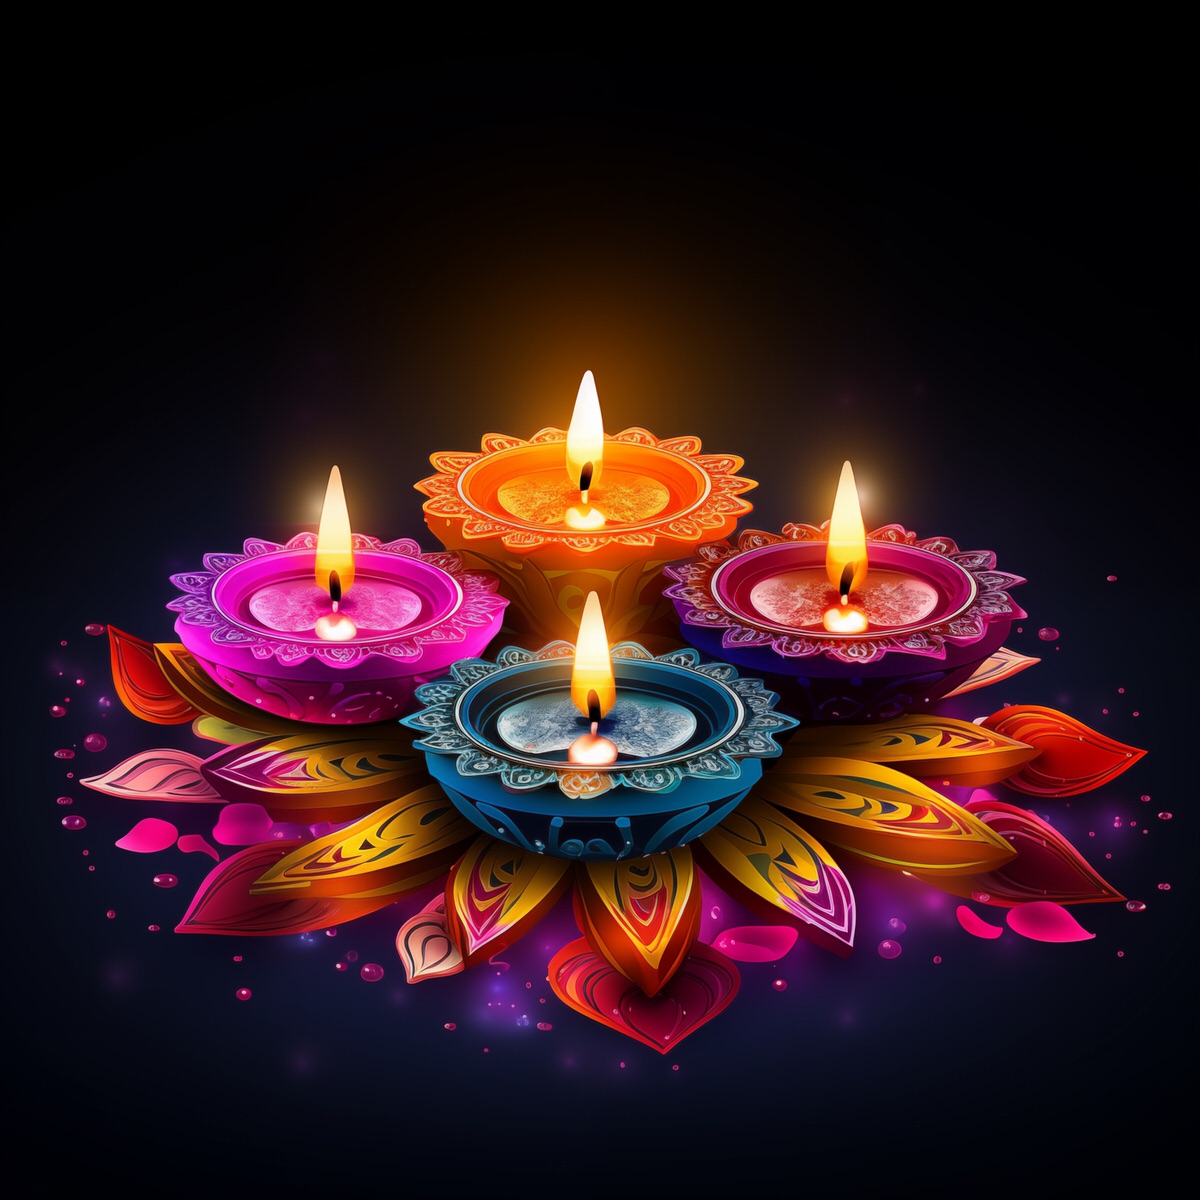 Happy Diwali and a prosperous New Year!